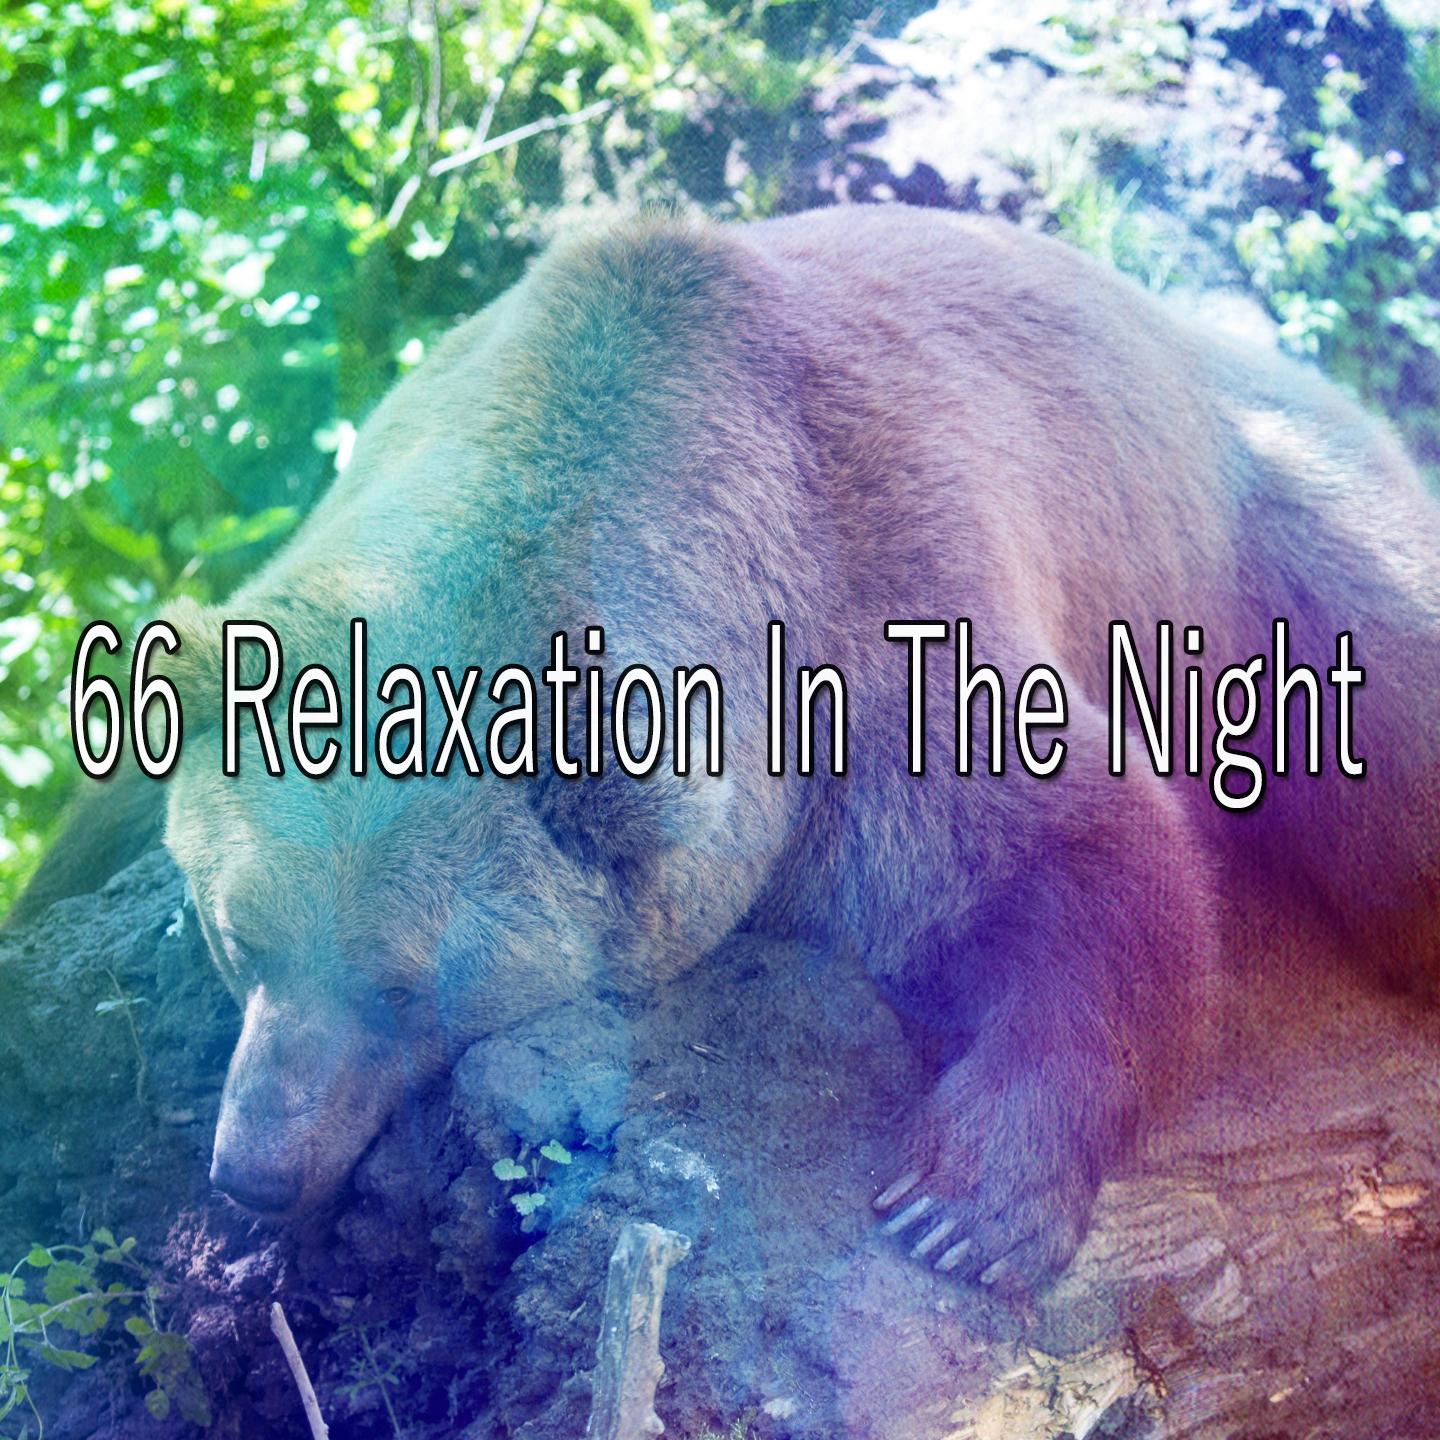 66 Relaxation in the Night